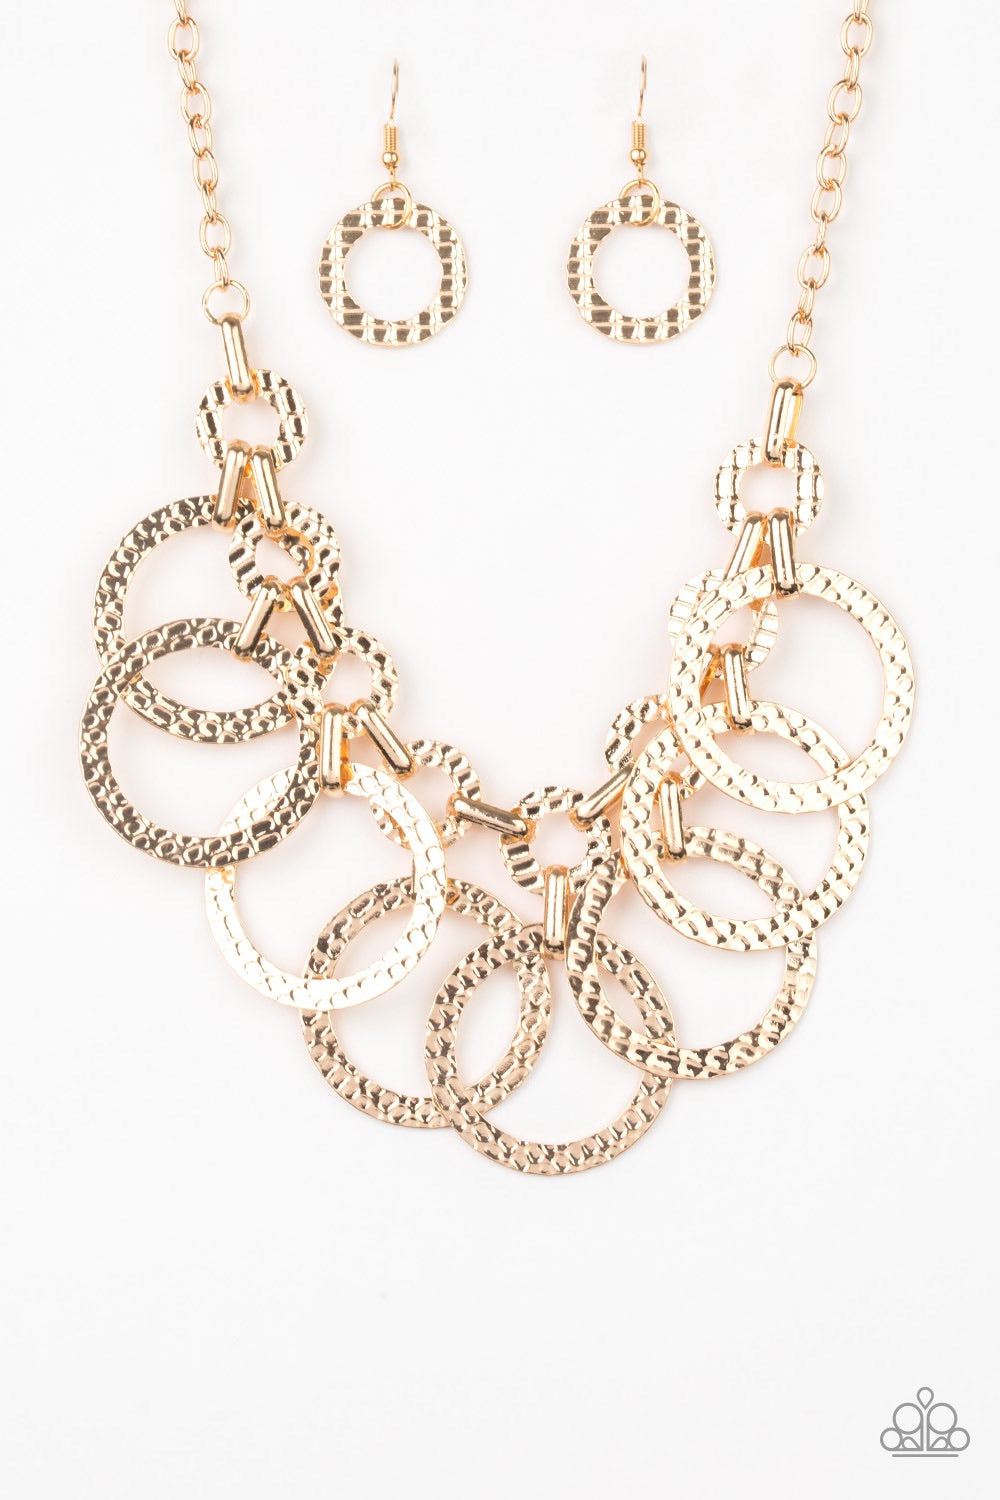 Jammin’ Jungle Gold-Necklace